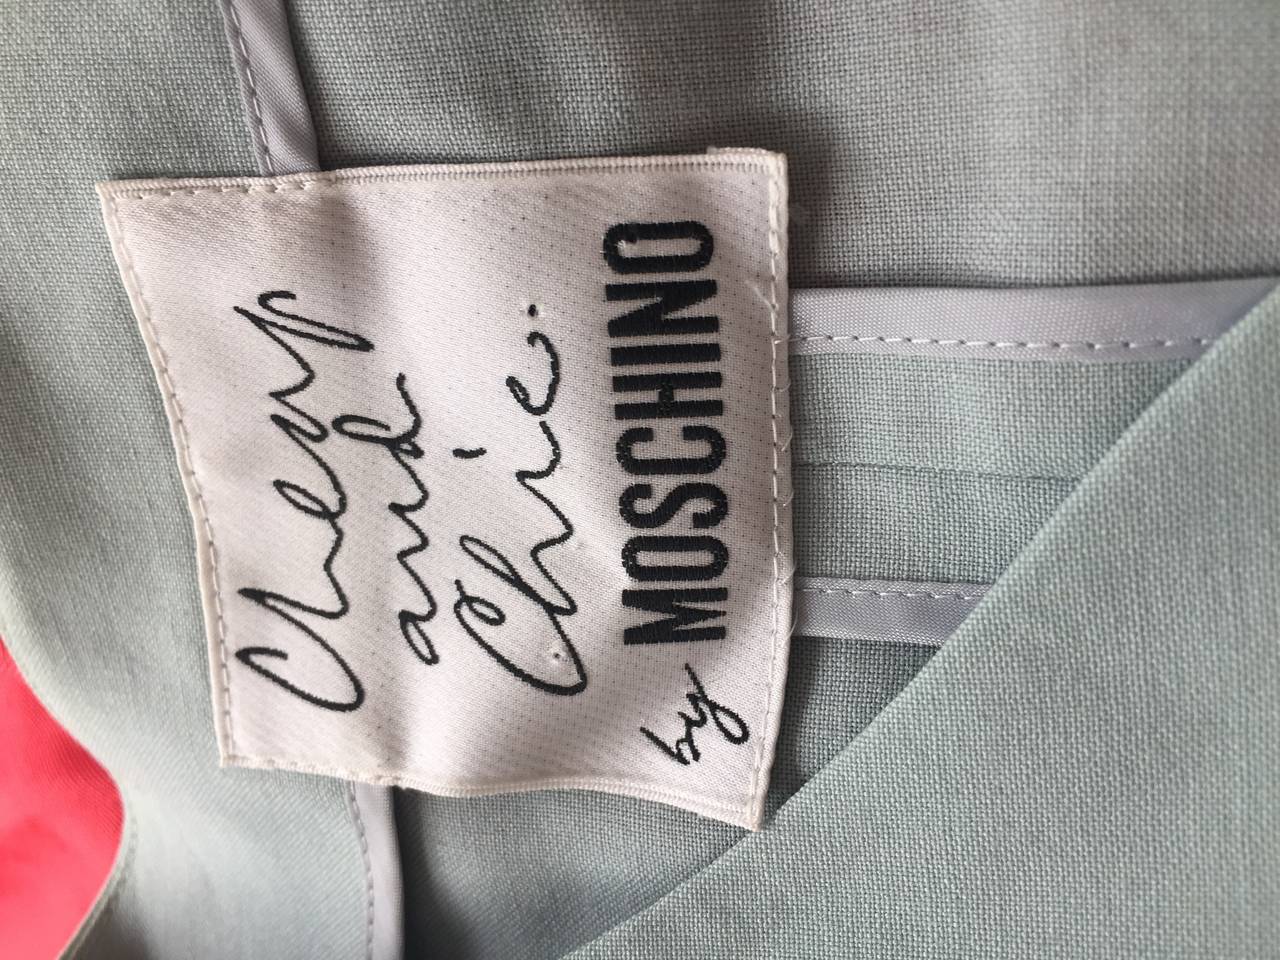 Incredible Vintage Moschino Cheap & Chic Light Blue Iconic ' Hearts ' Skirt Suit 1